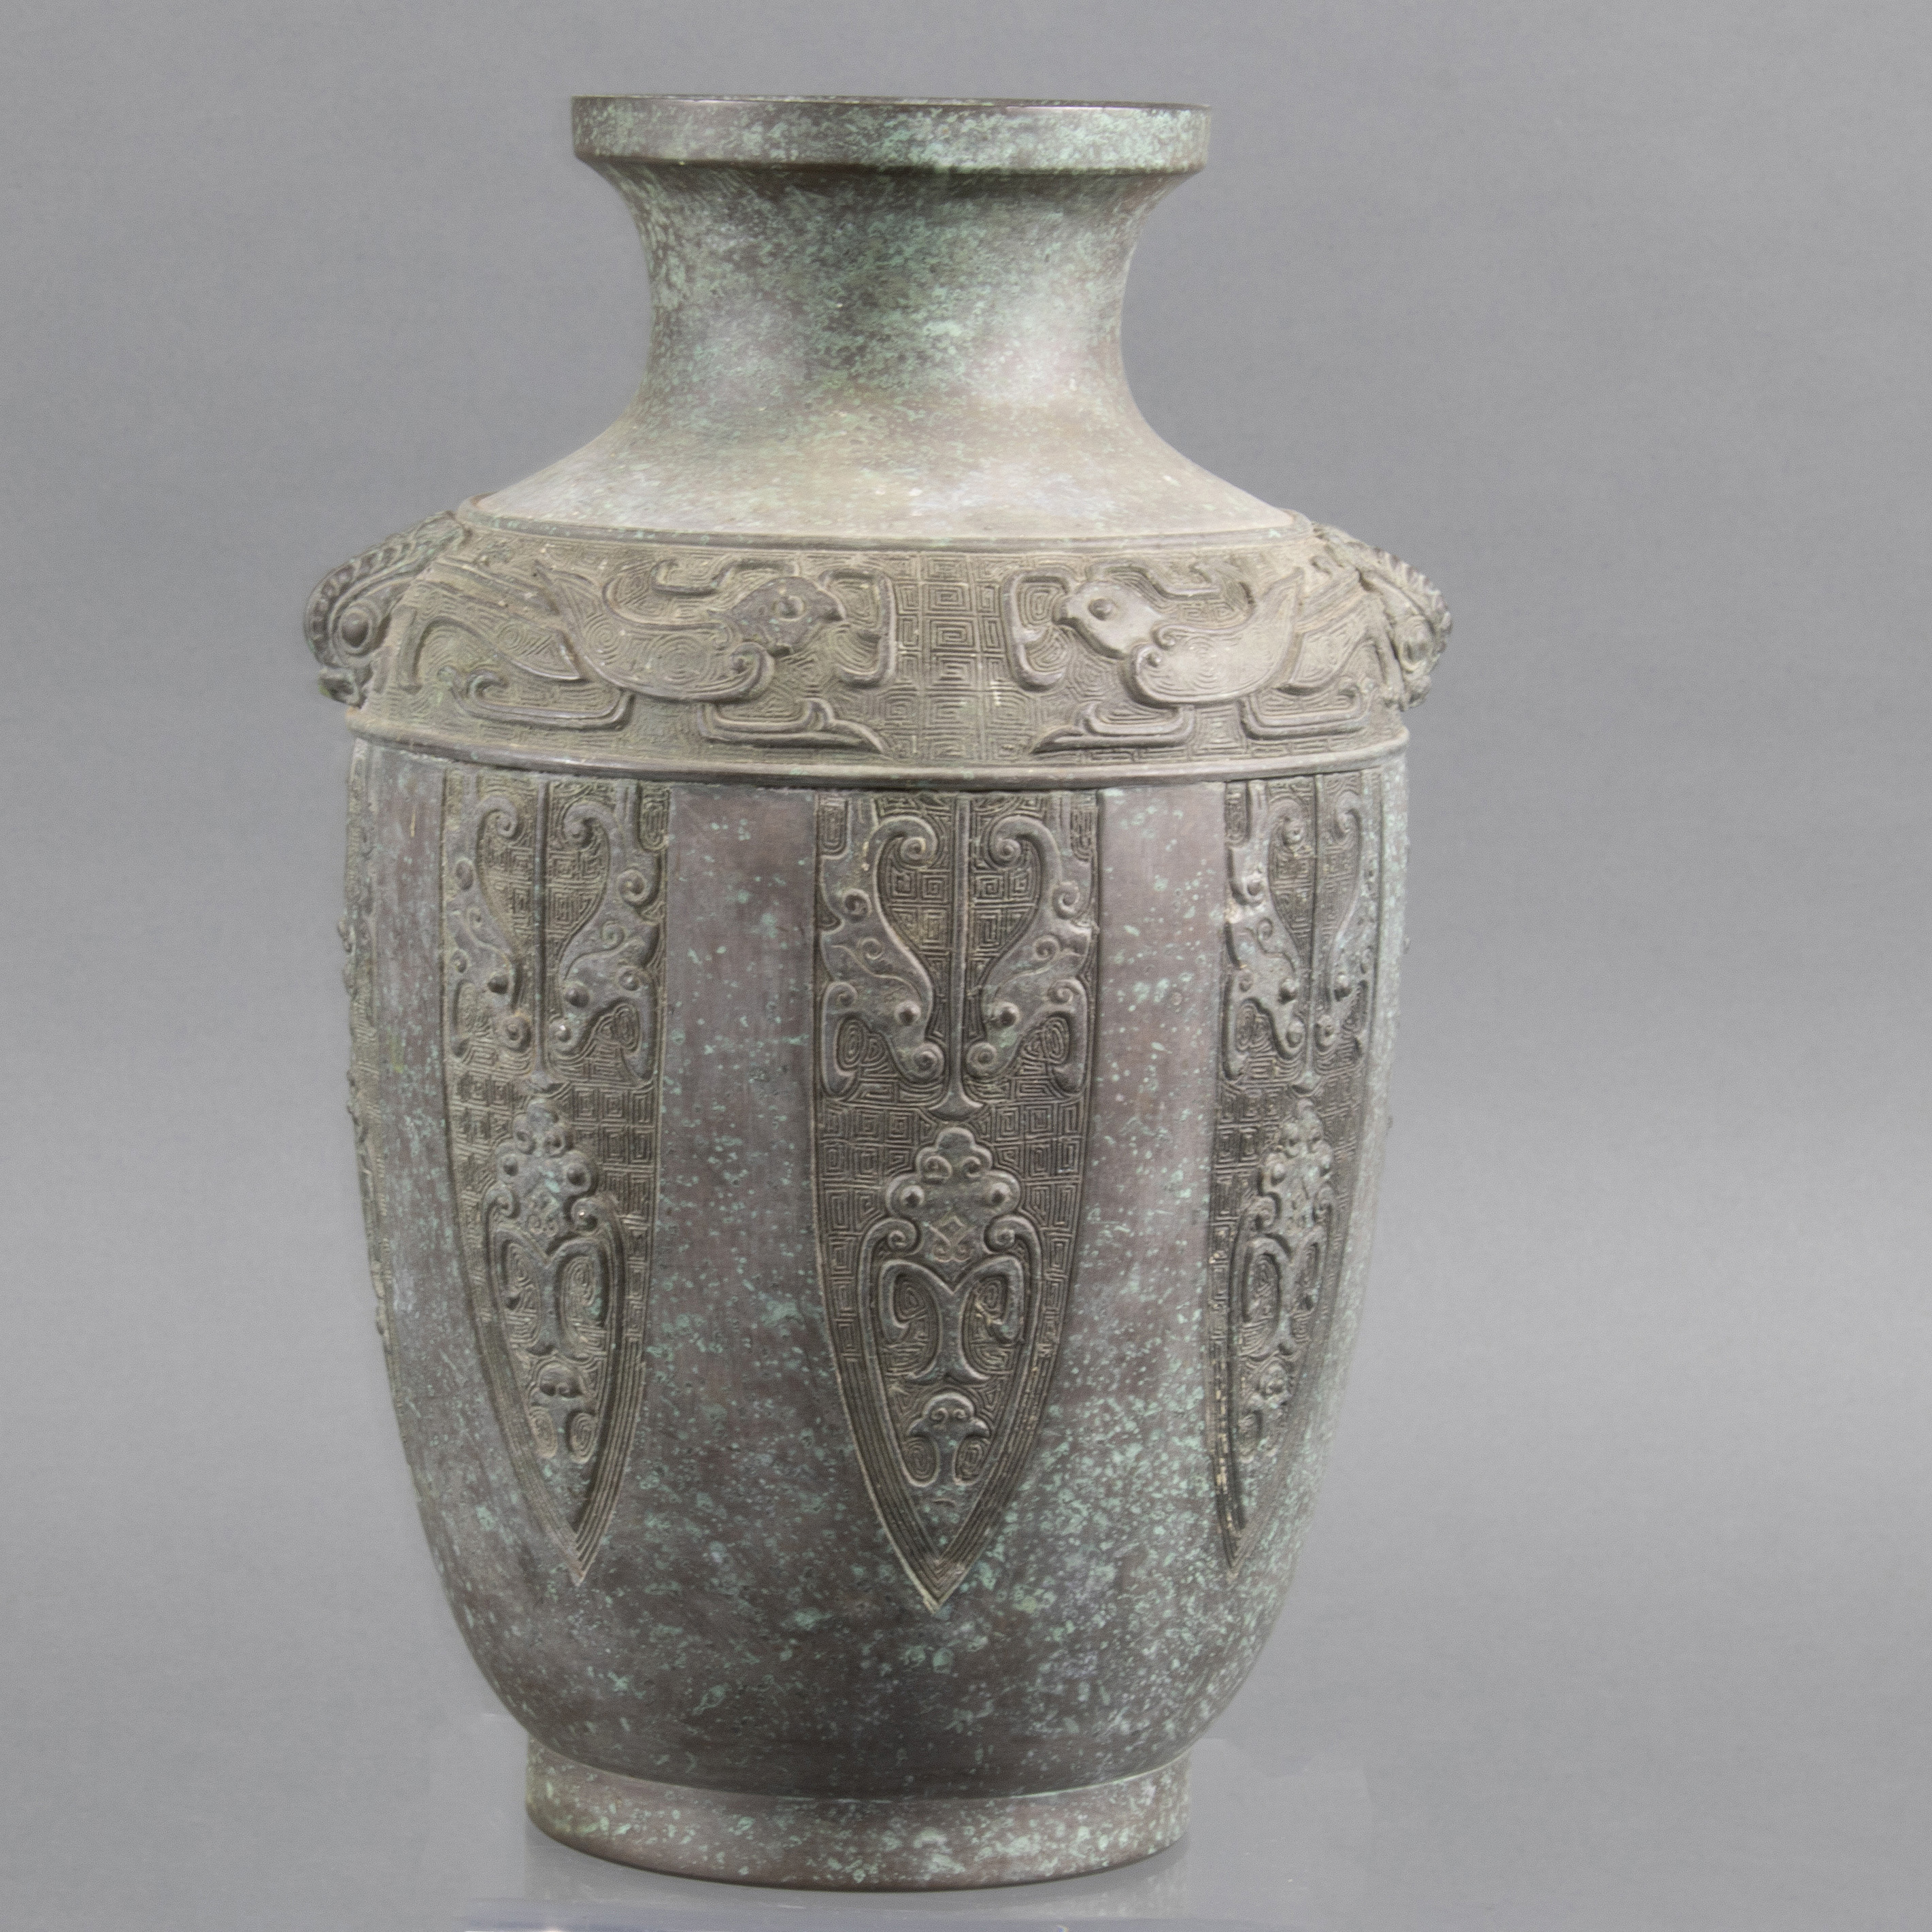 CHINESE ARCHAISTIC BRONZE VASE 3a47f2